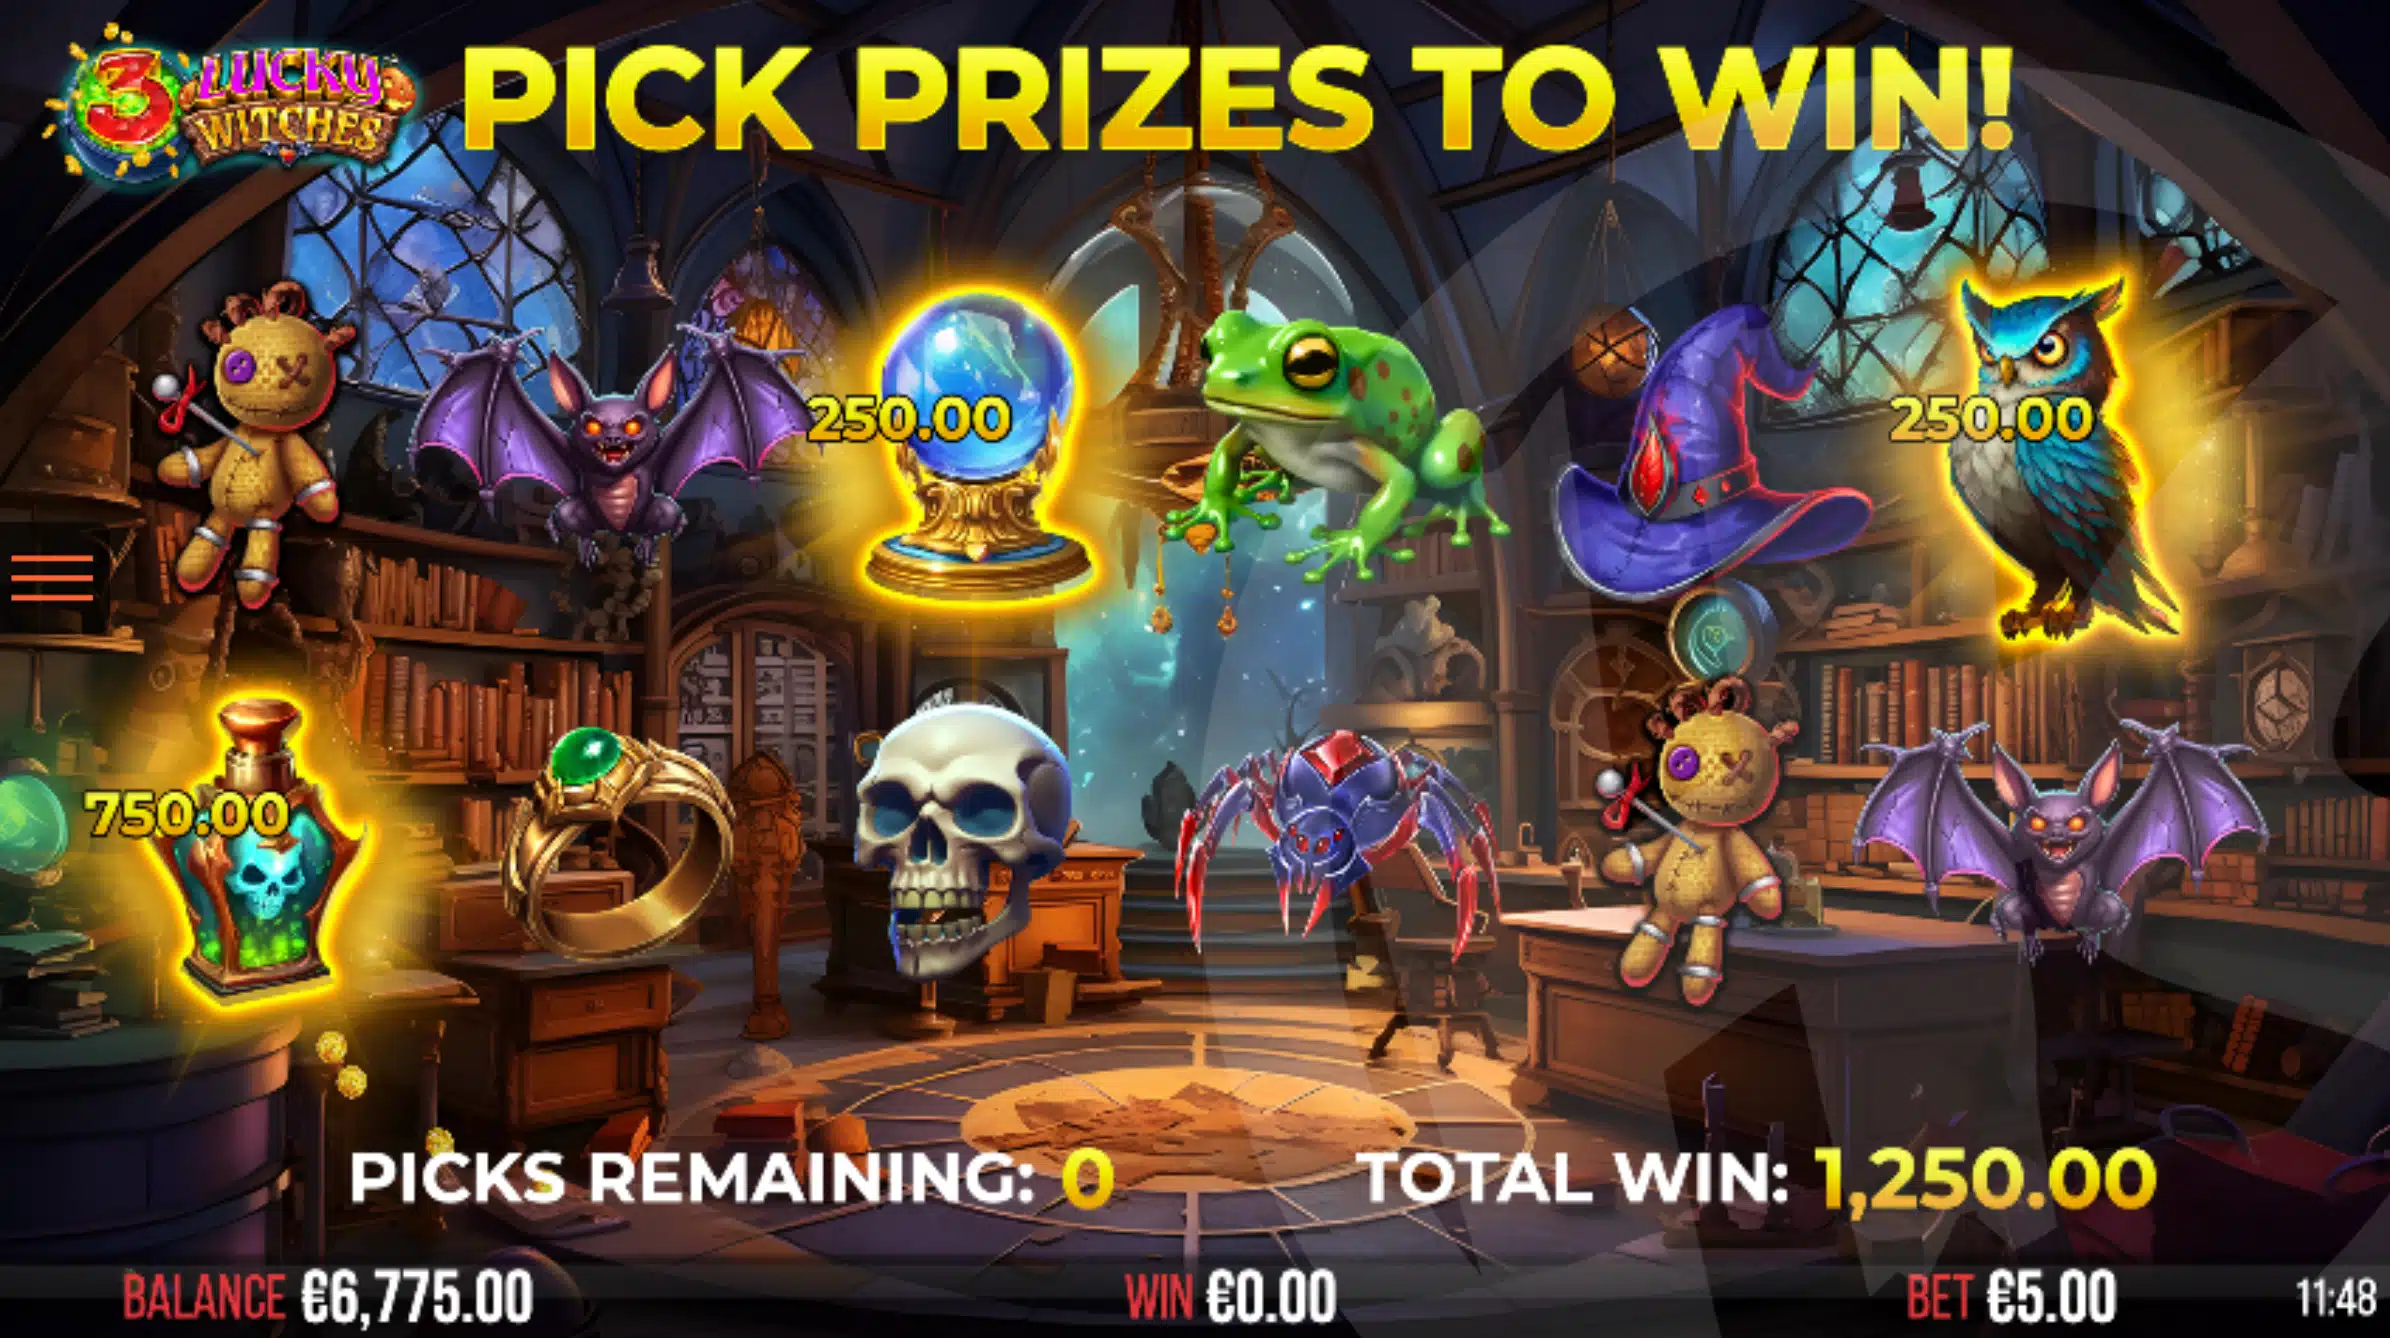 3 Lucky Witches Pick-a-Win Bonus